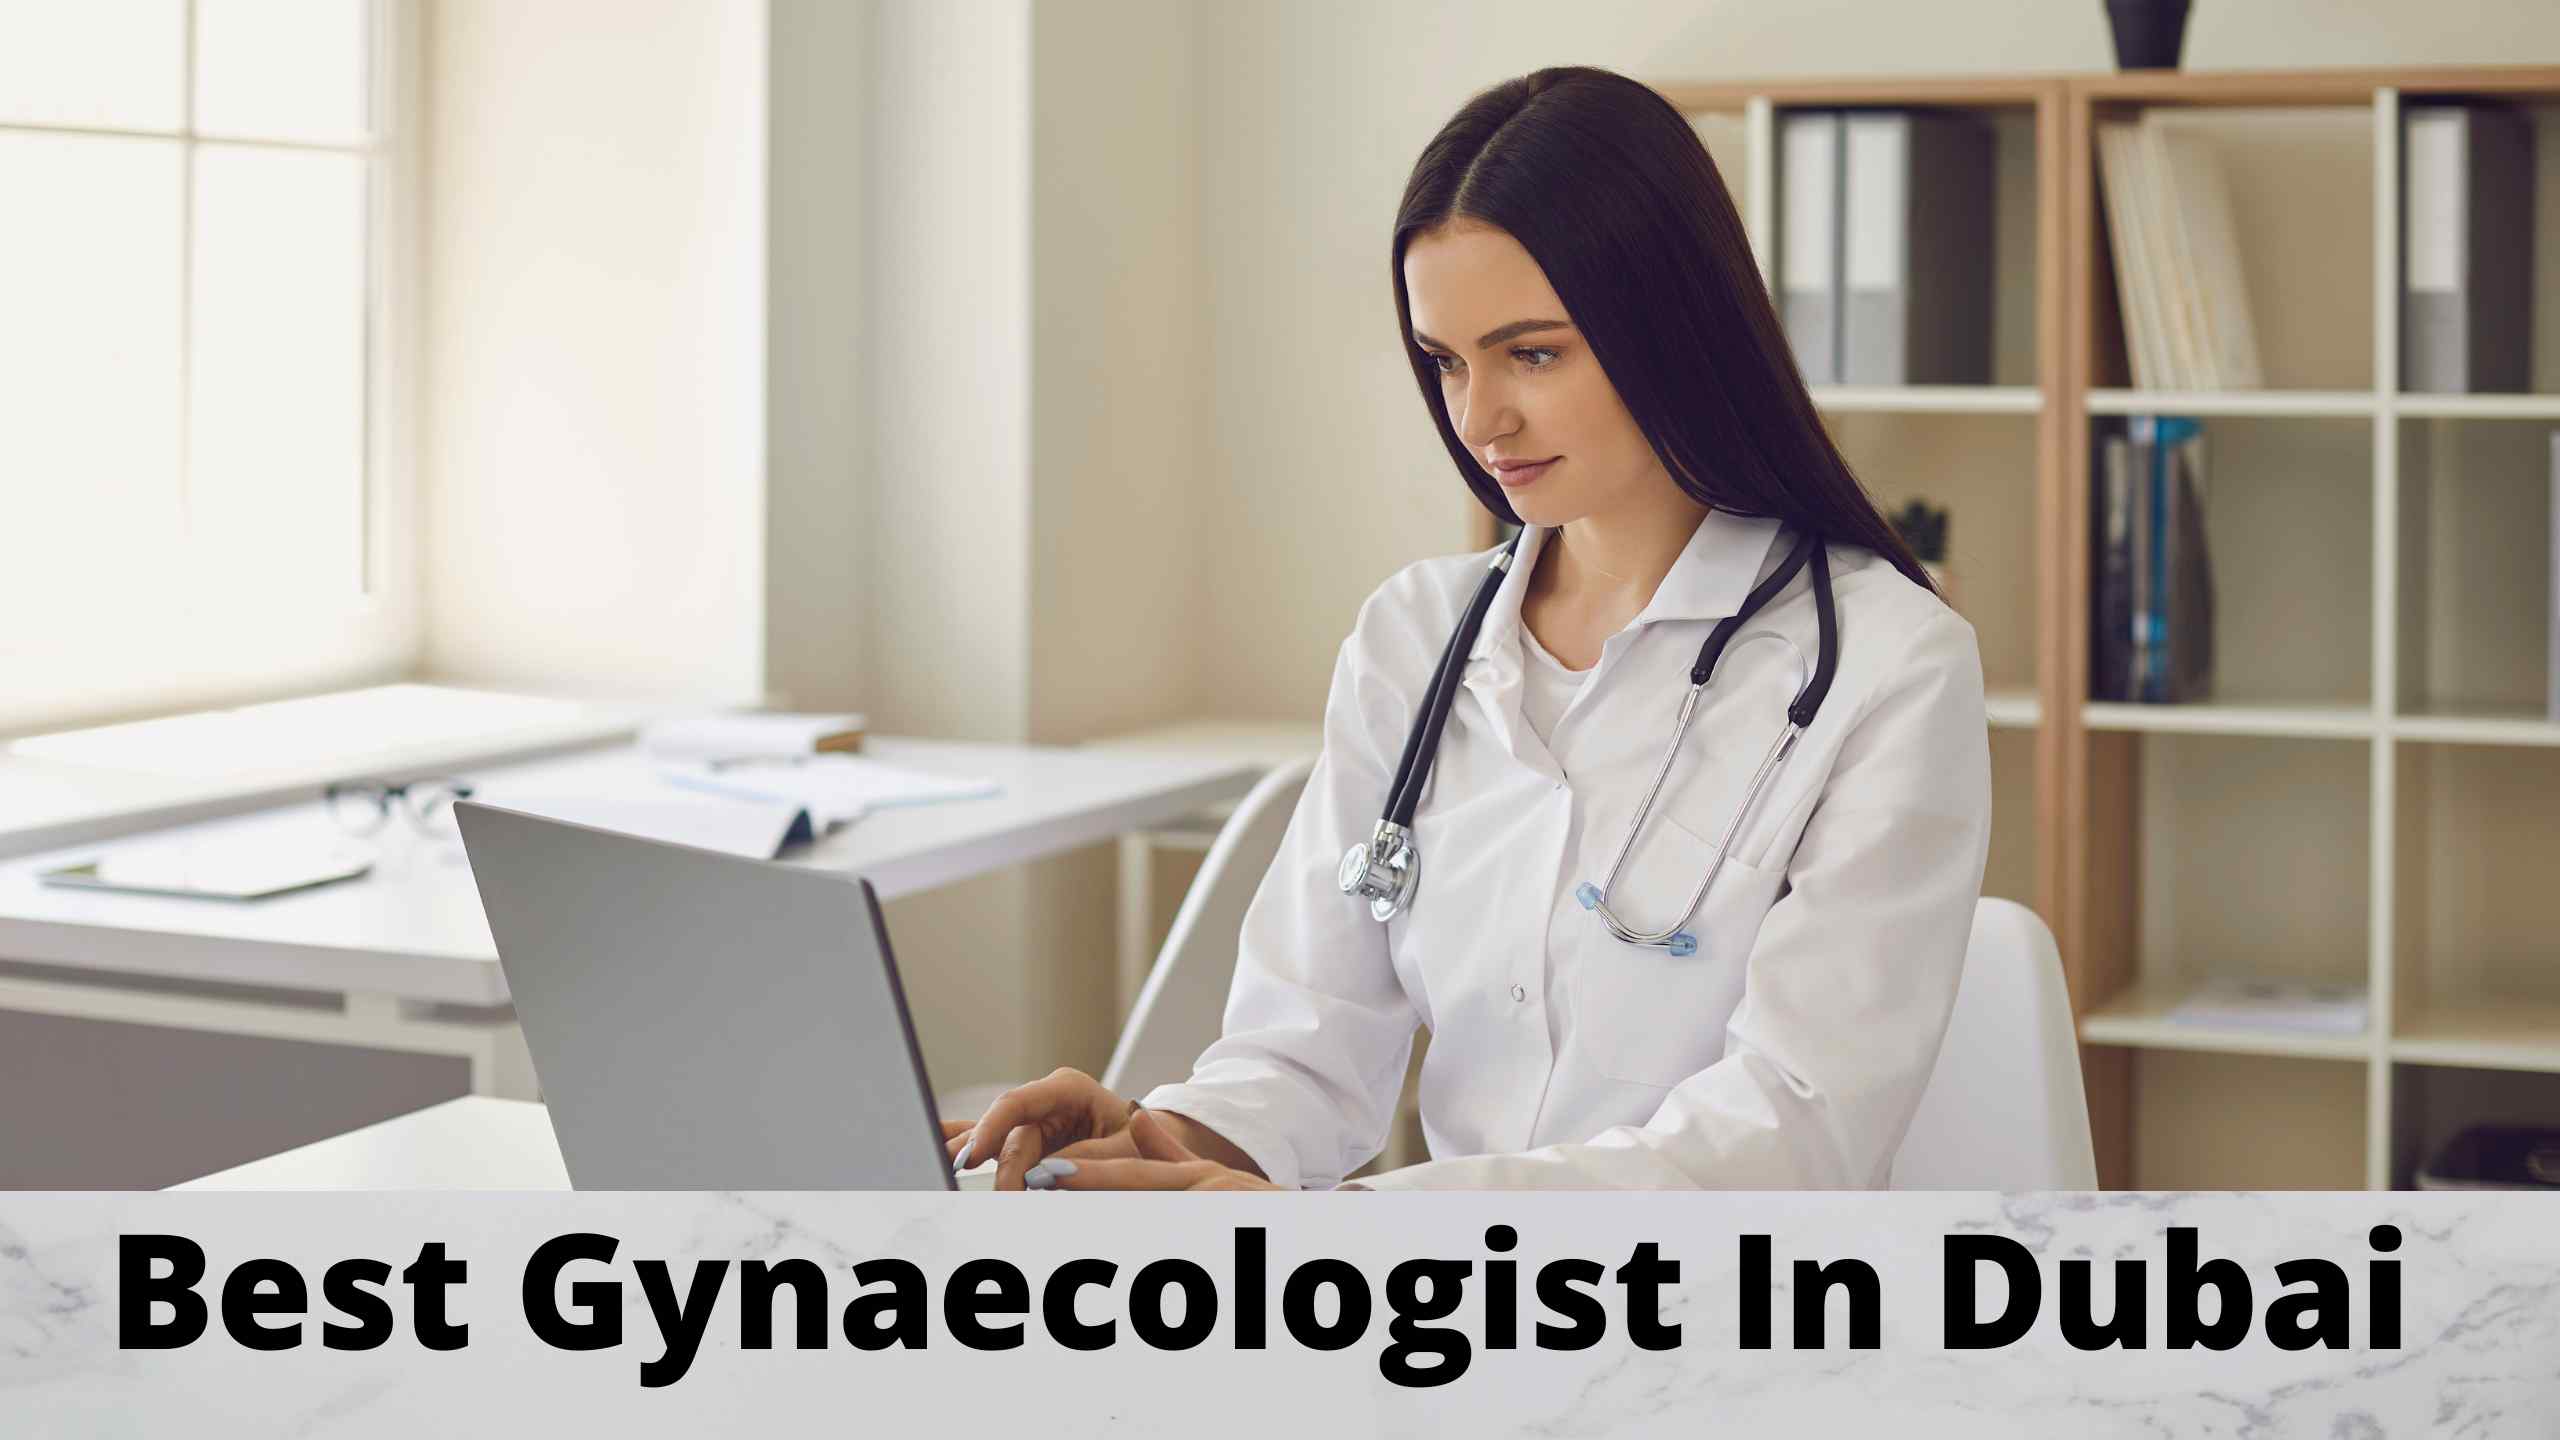 Gynaecologists in Dubai